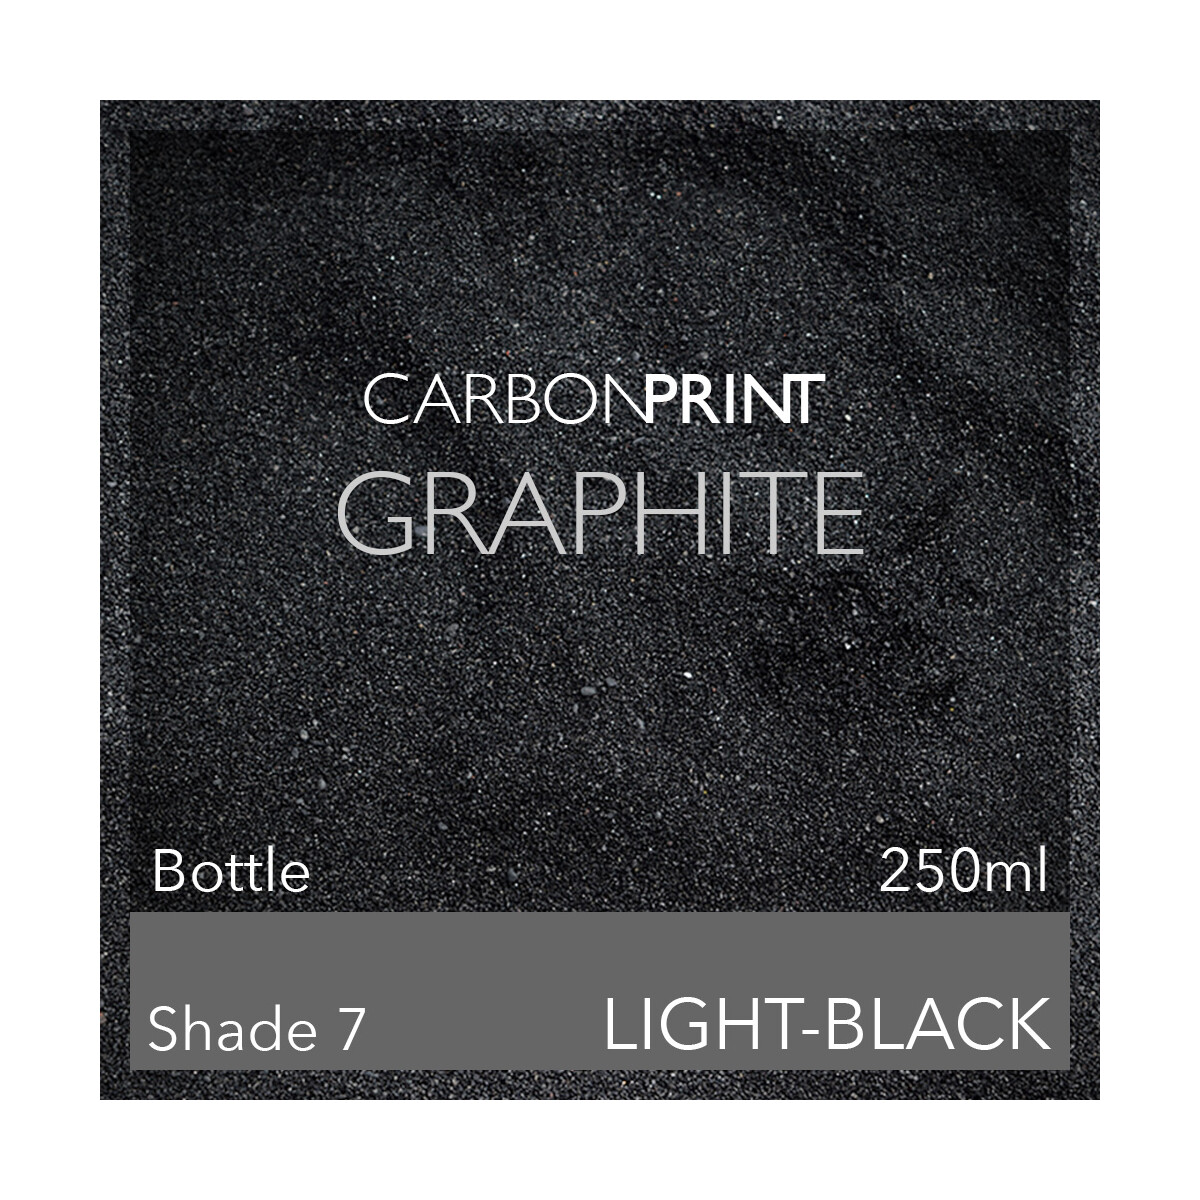 Carbonprint Graphite Shade7 Channel LK / GY 250ml